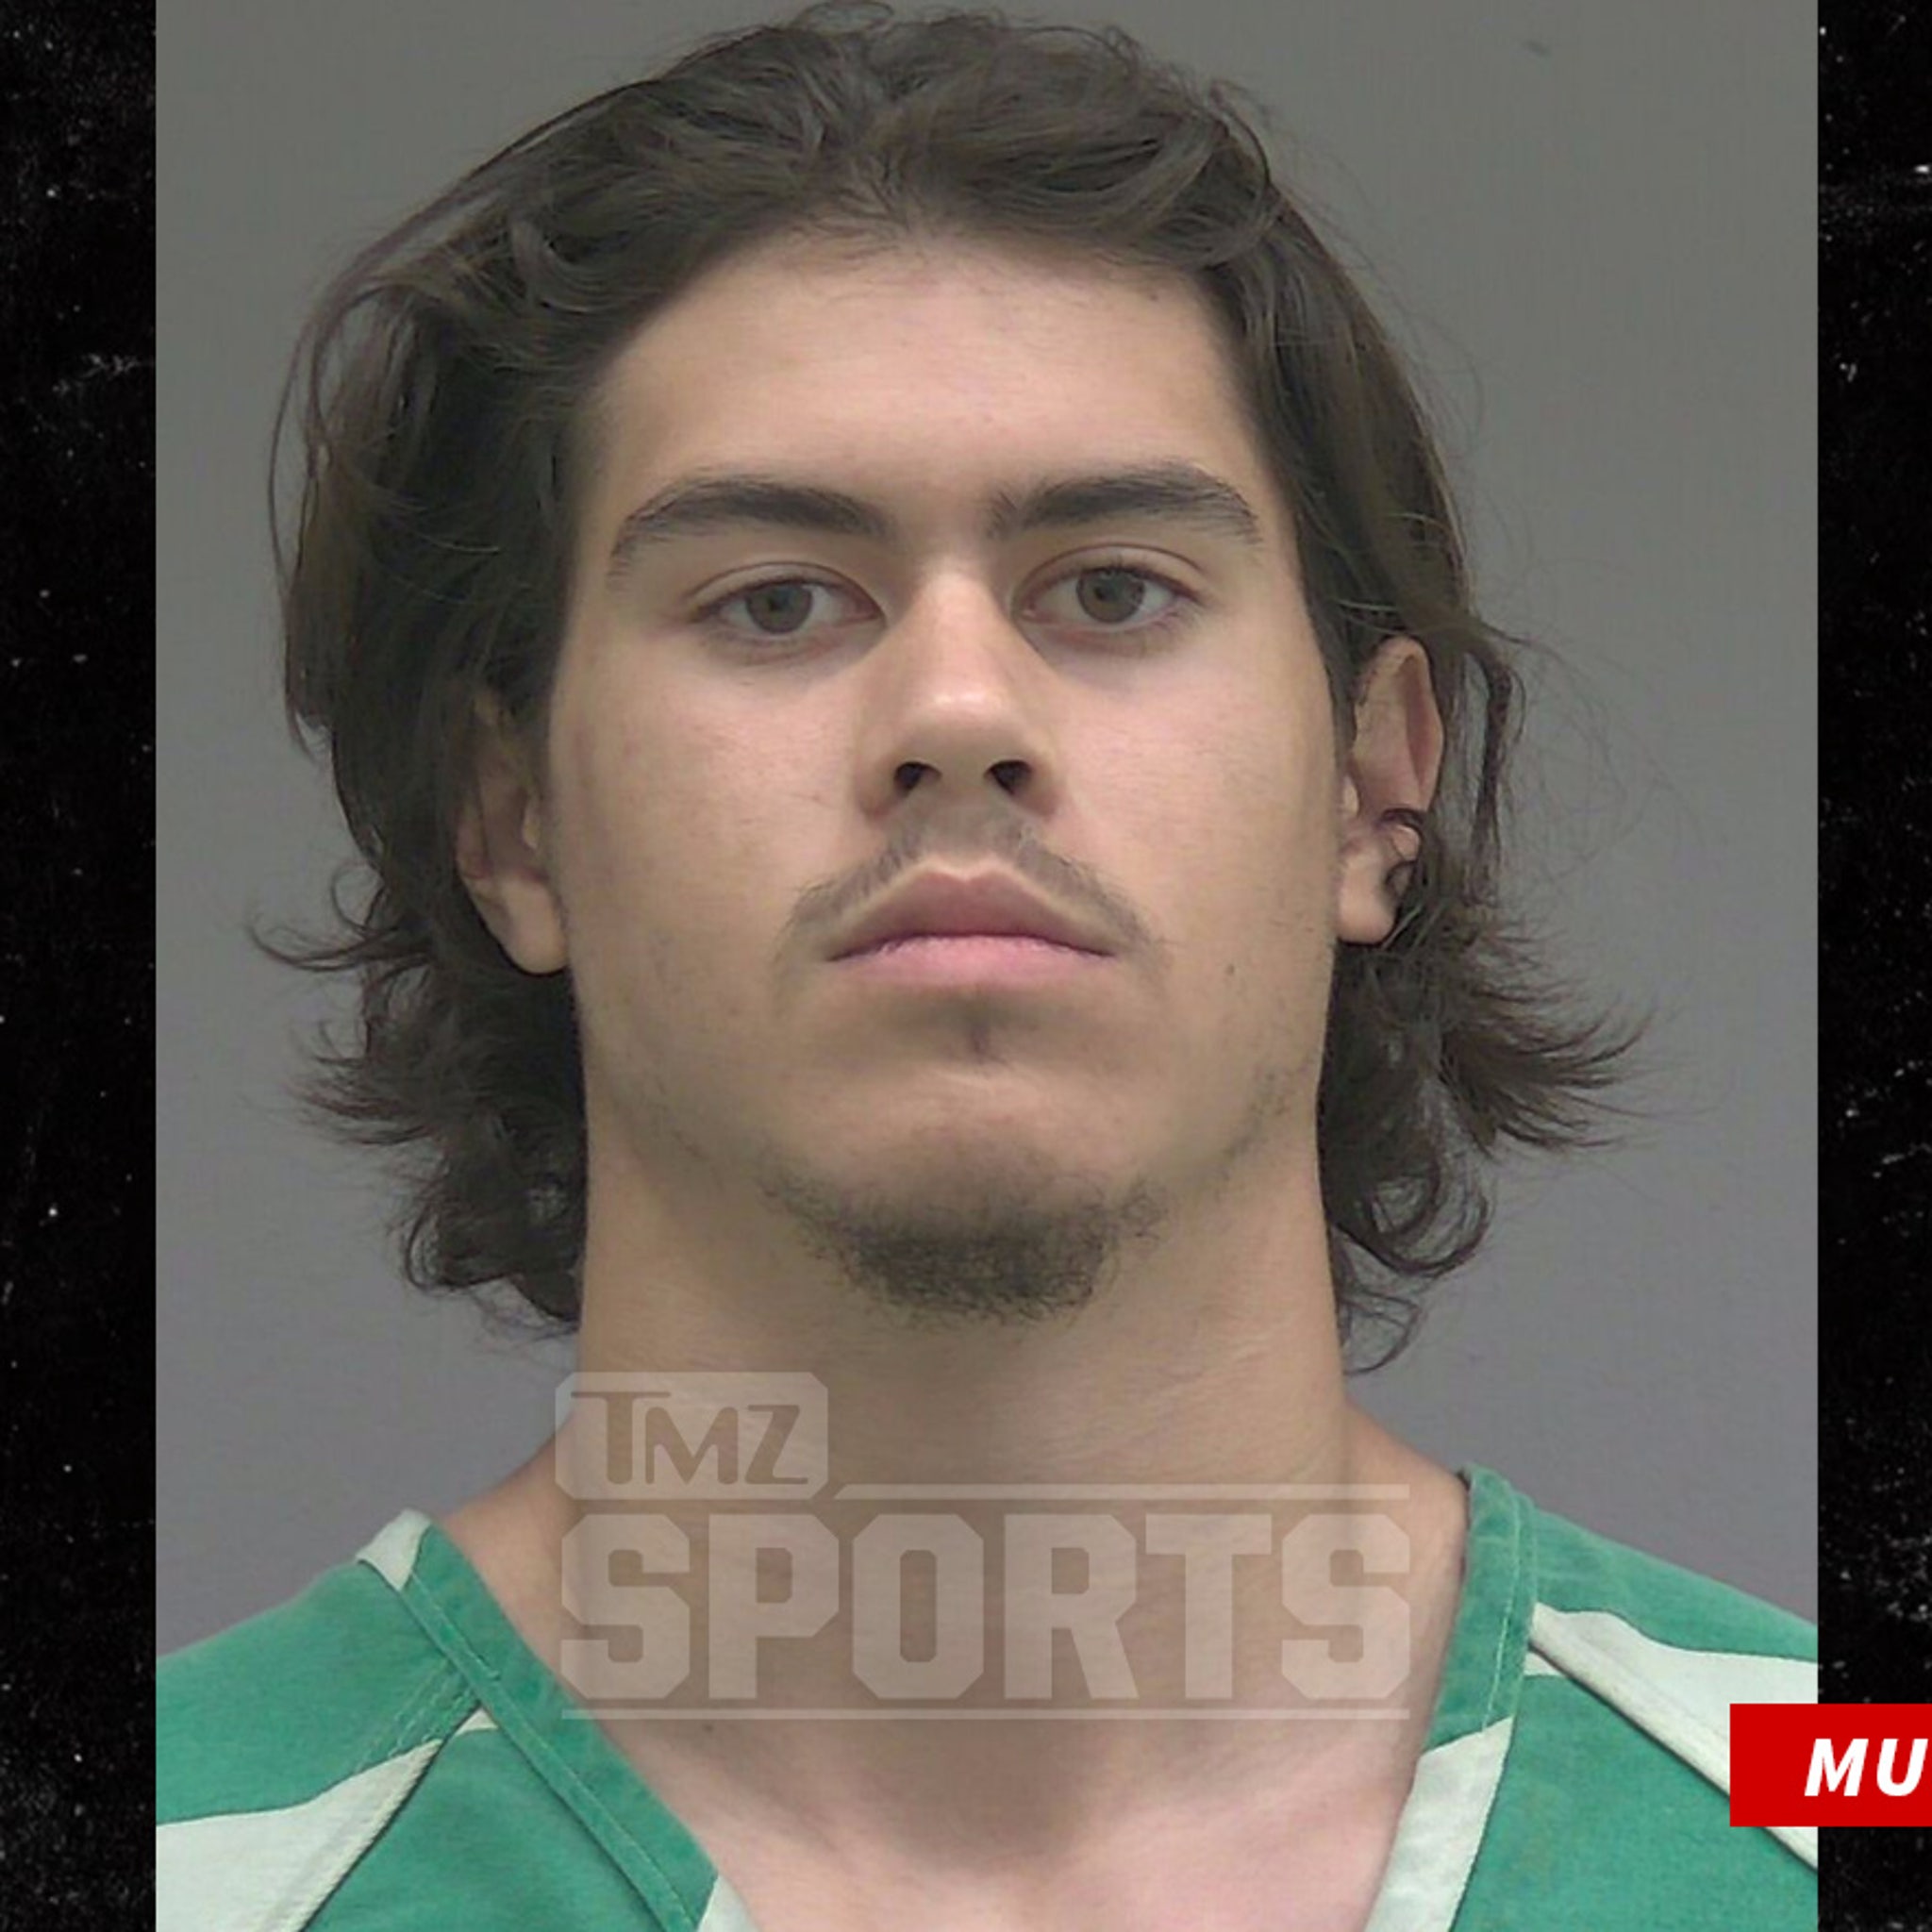 UF QB Jalen Kitna Shared Image Of Adult Male Having Sex With Child, Cops image pic